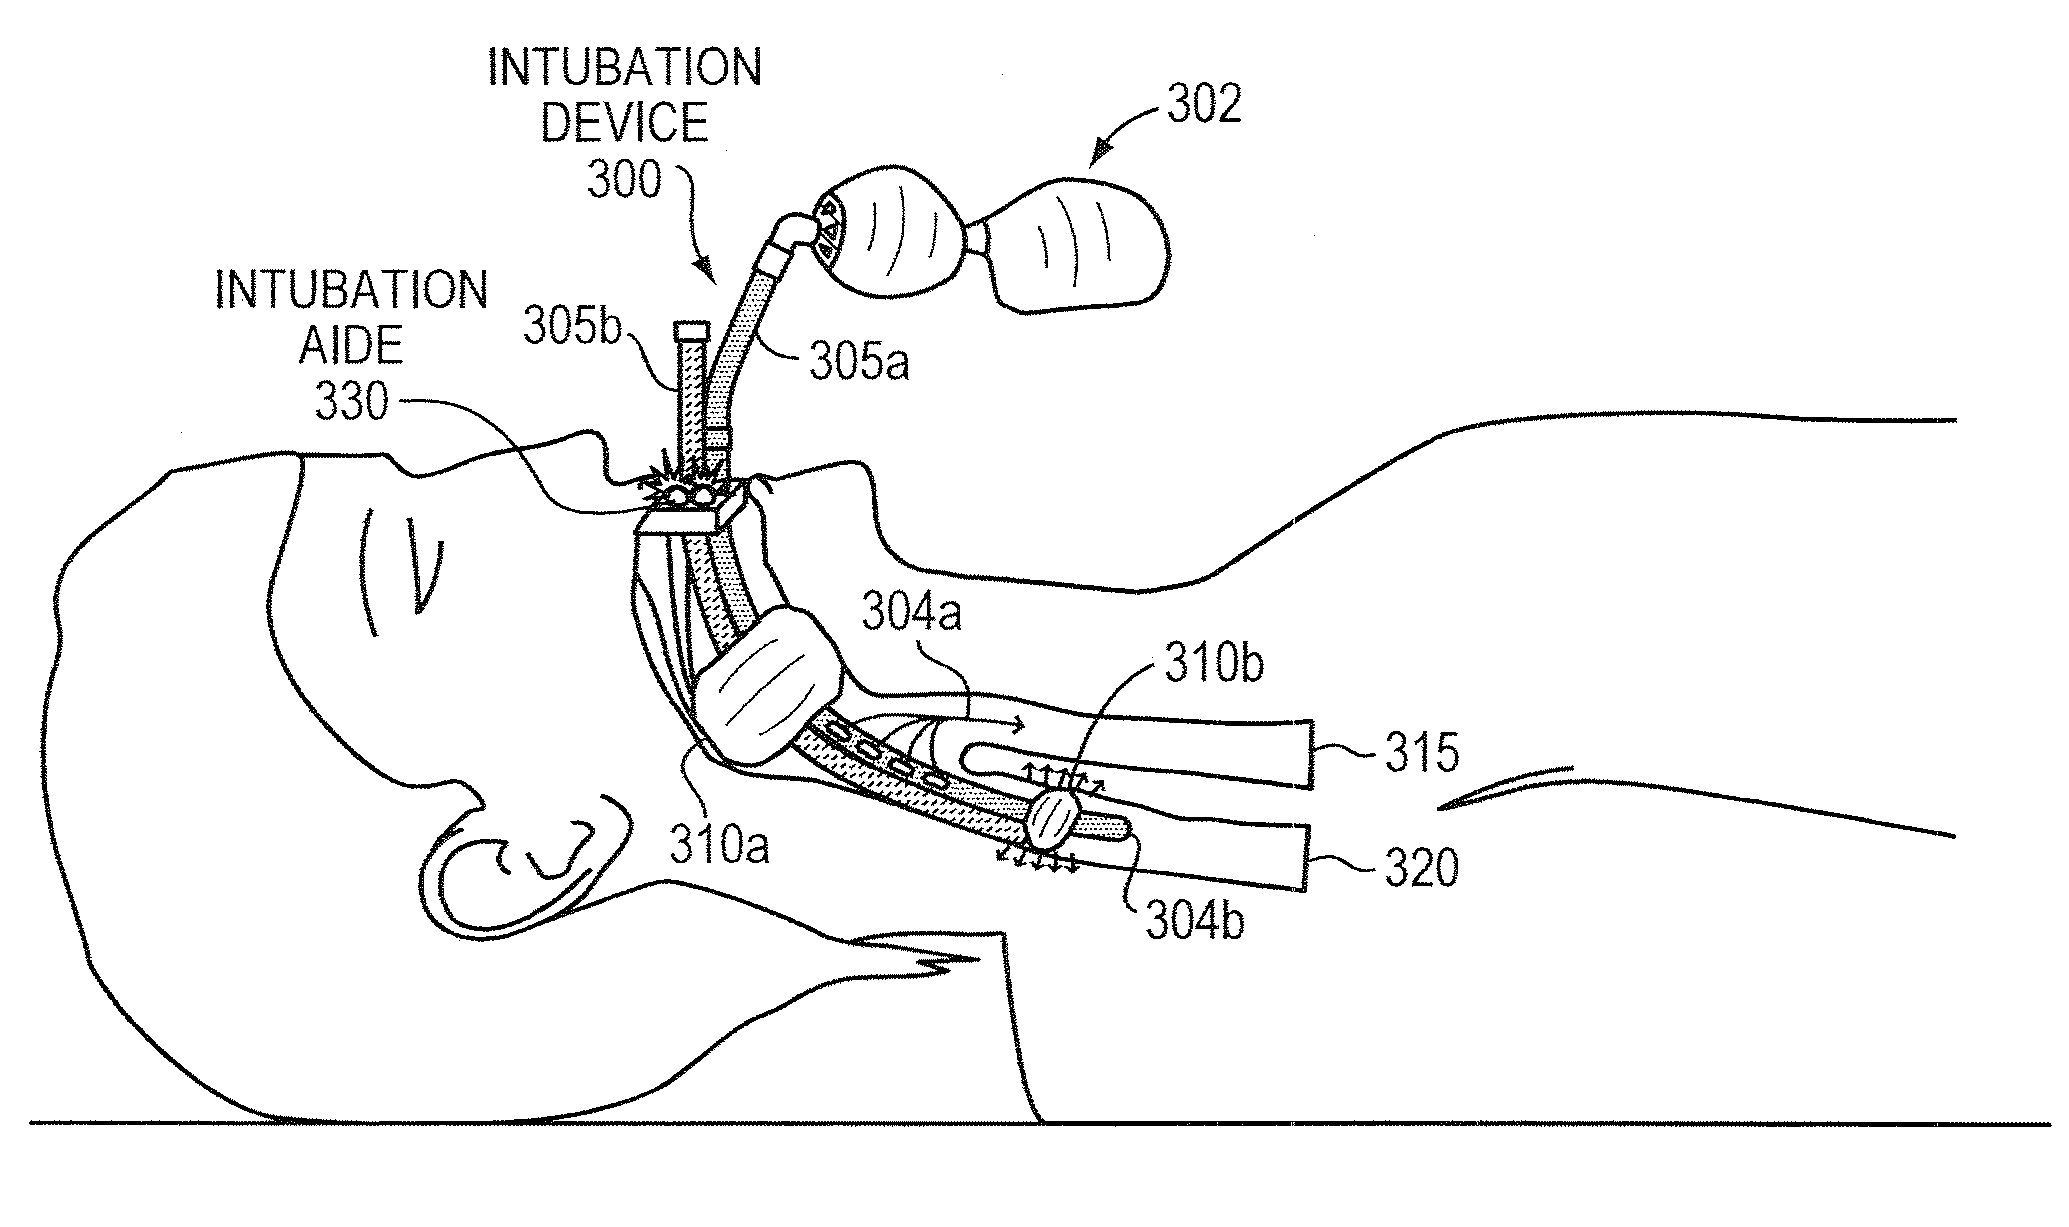 Methods and apparatus for safe application of an intubation device